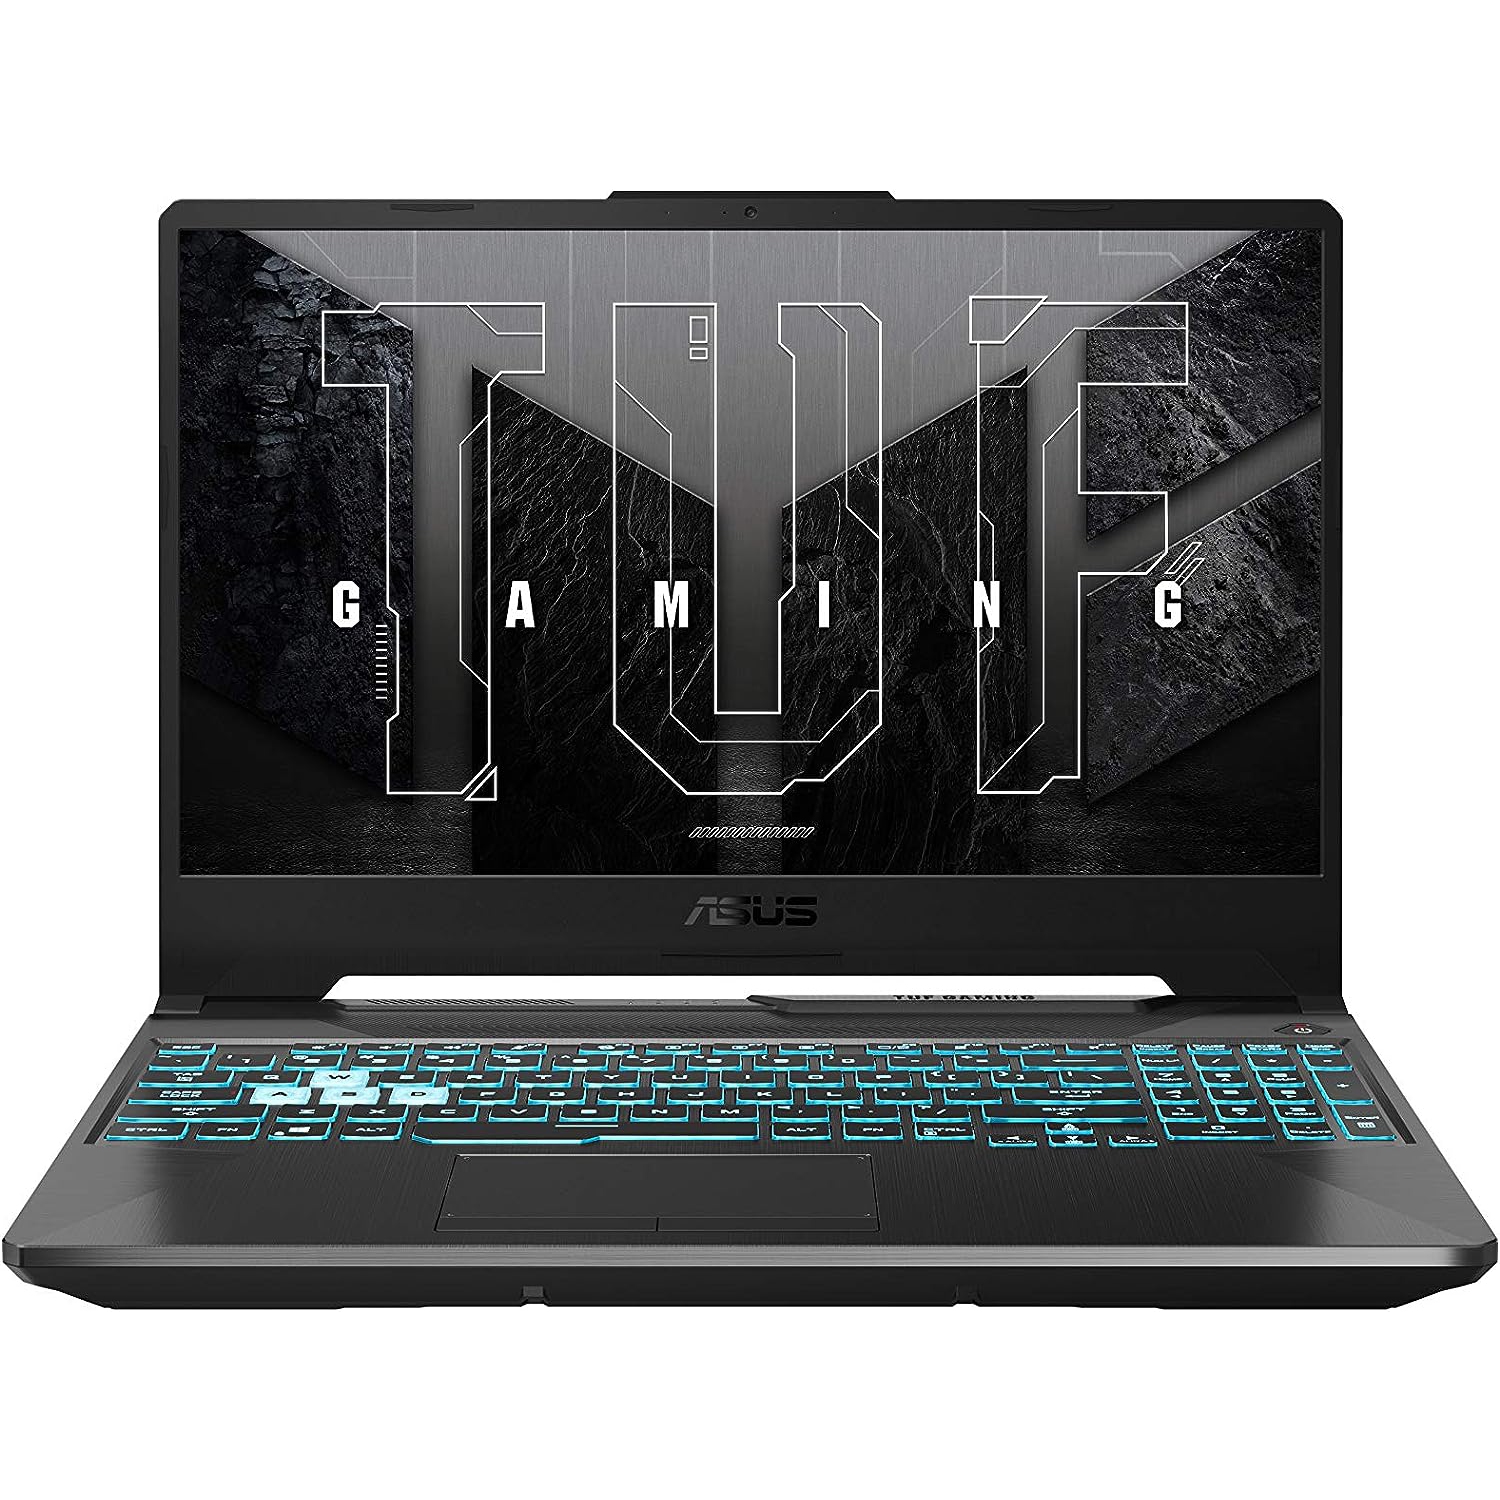 ASUS TUF Gaming Laptop 15.6 Intel i5-11400H 8GB 512SSD RTX 2050 Windows 11 Home Refurbished Excellent